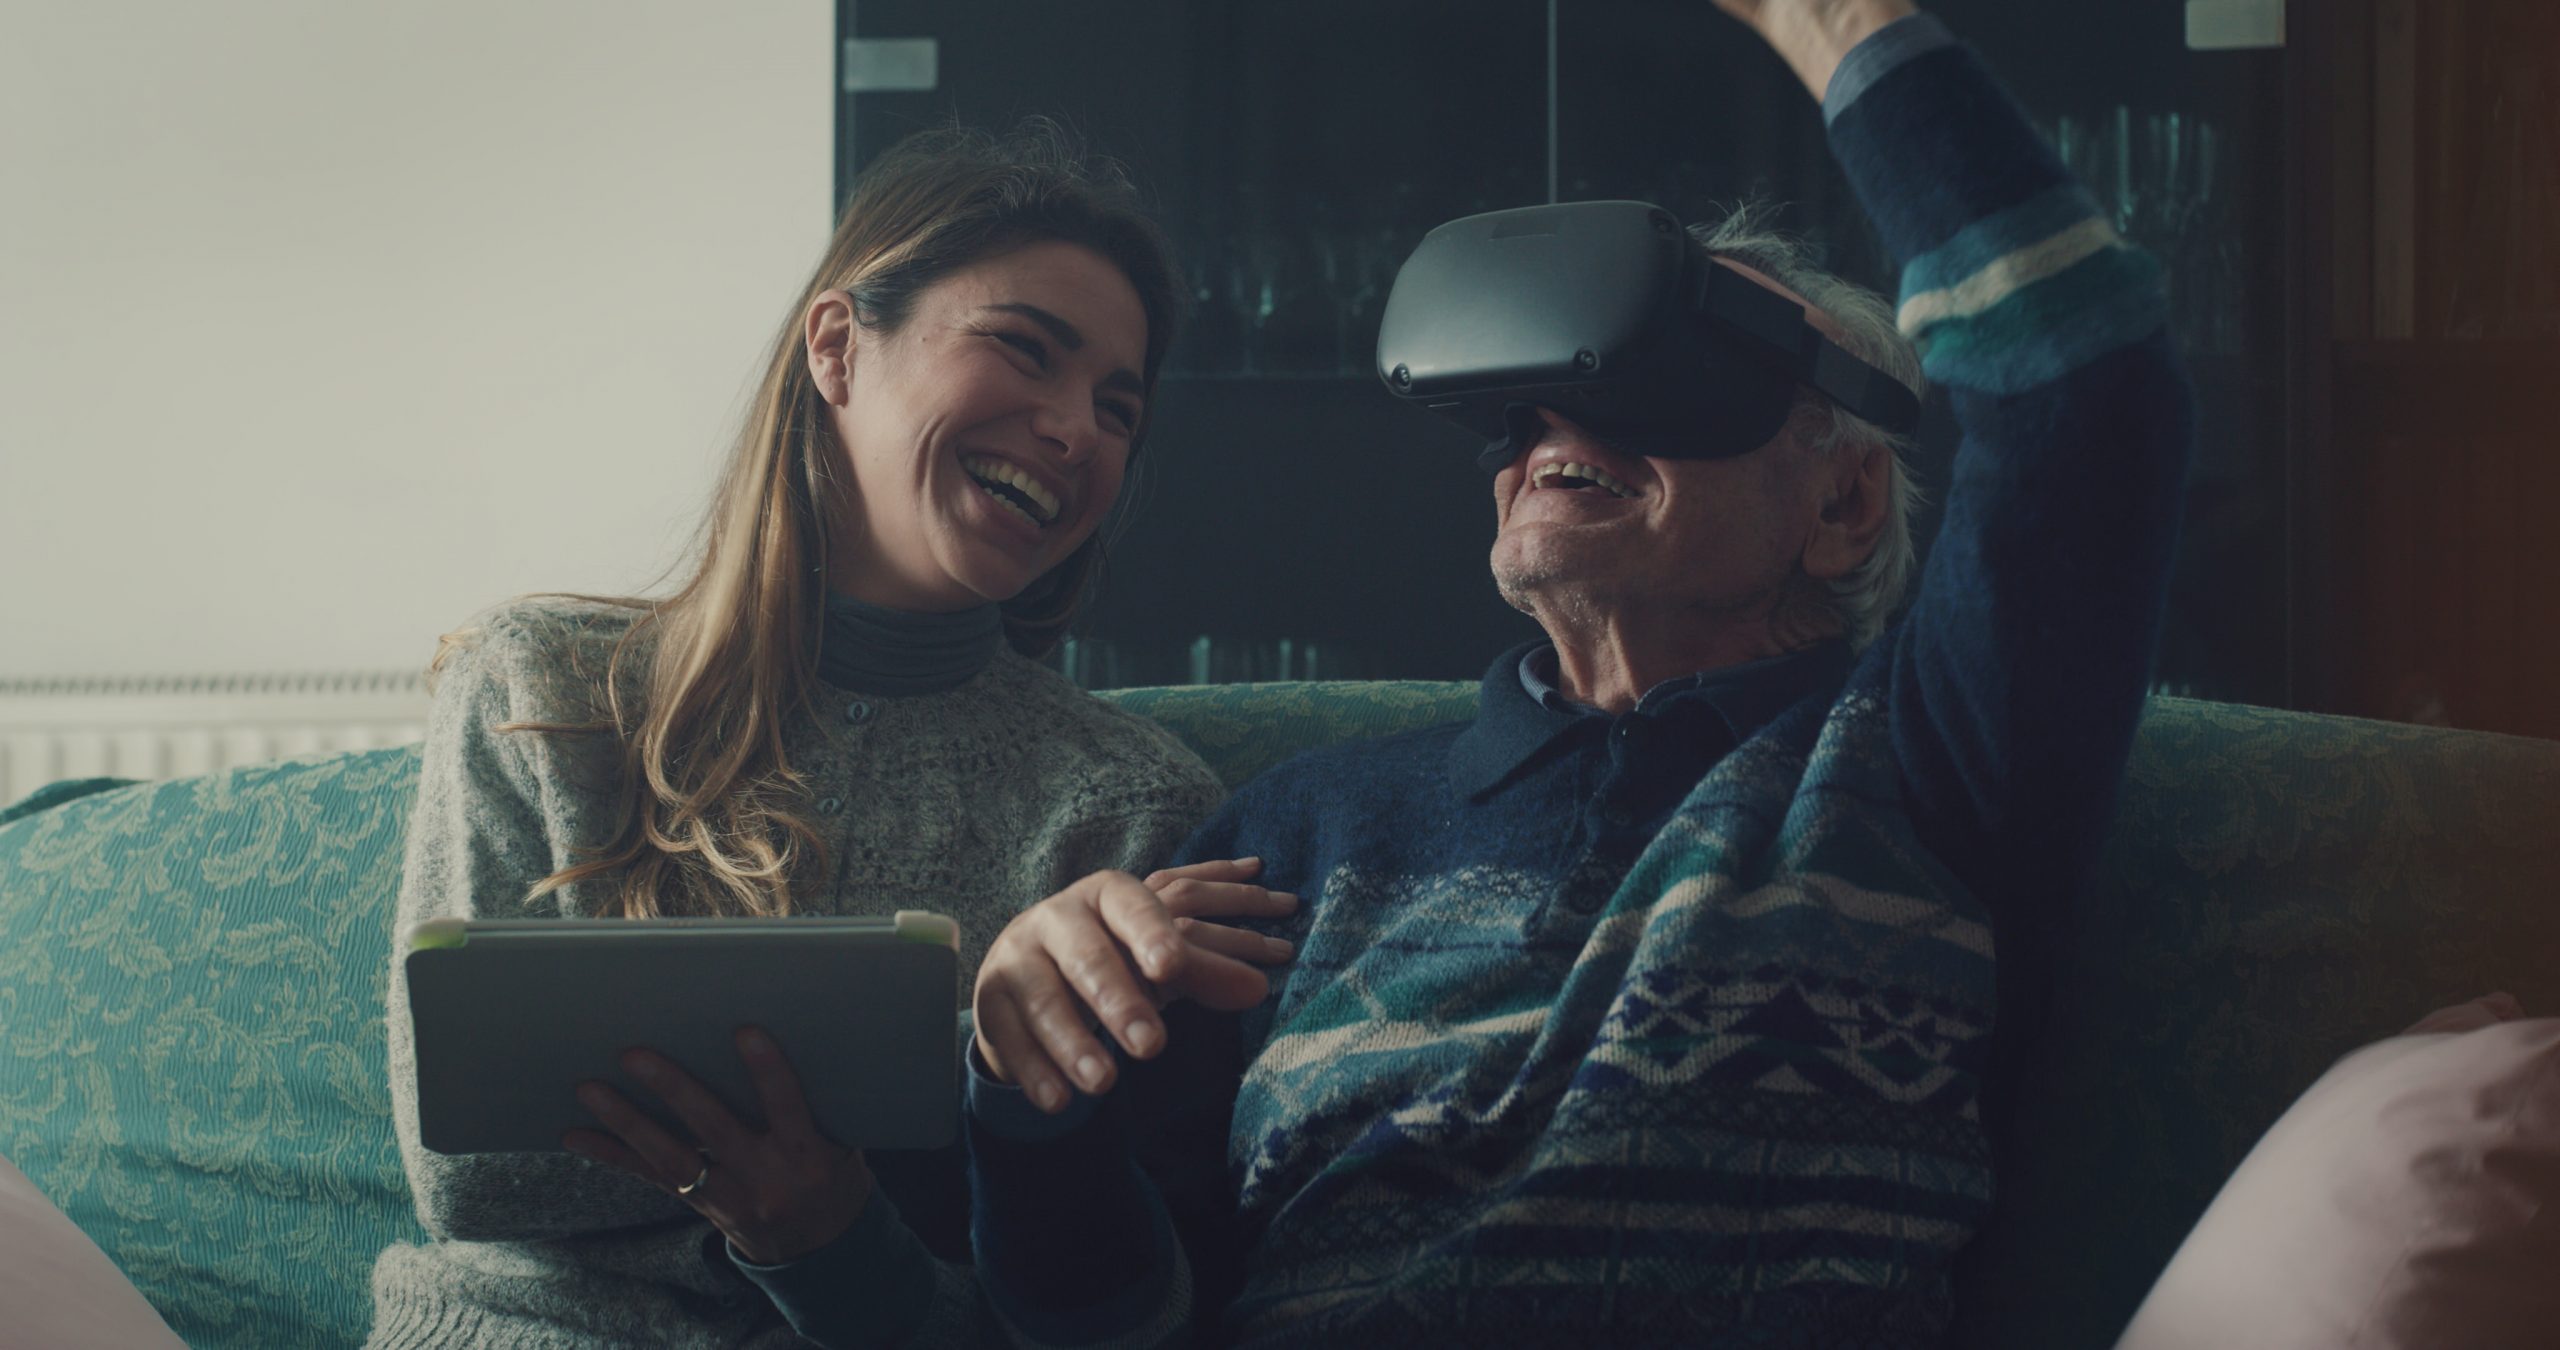 Cinematic Shot Of Senior Grandfather With Vr Glasses and Granddaughter